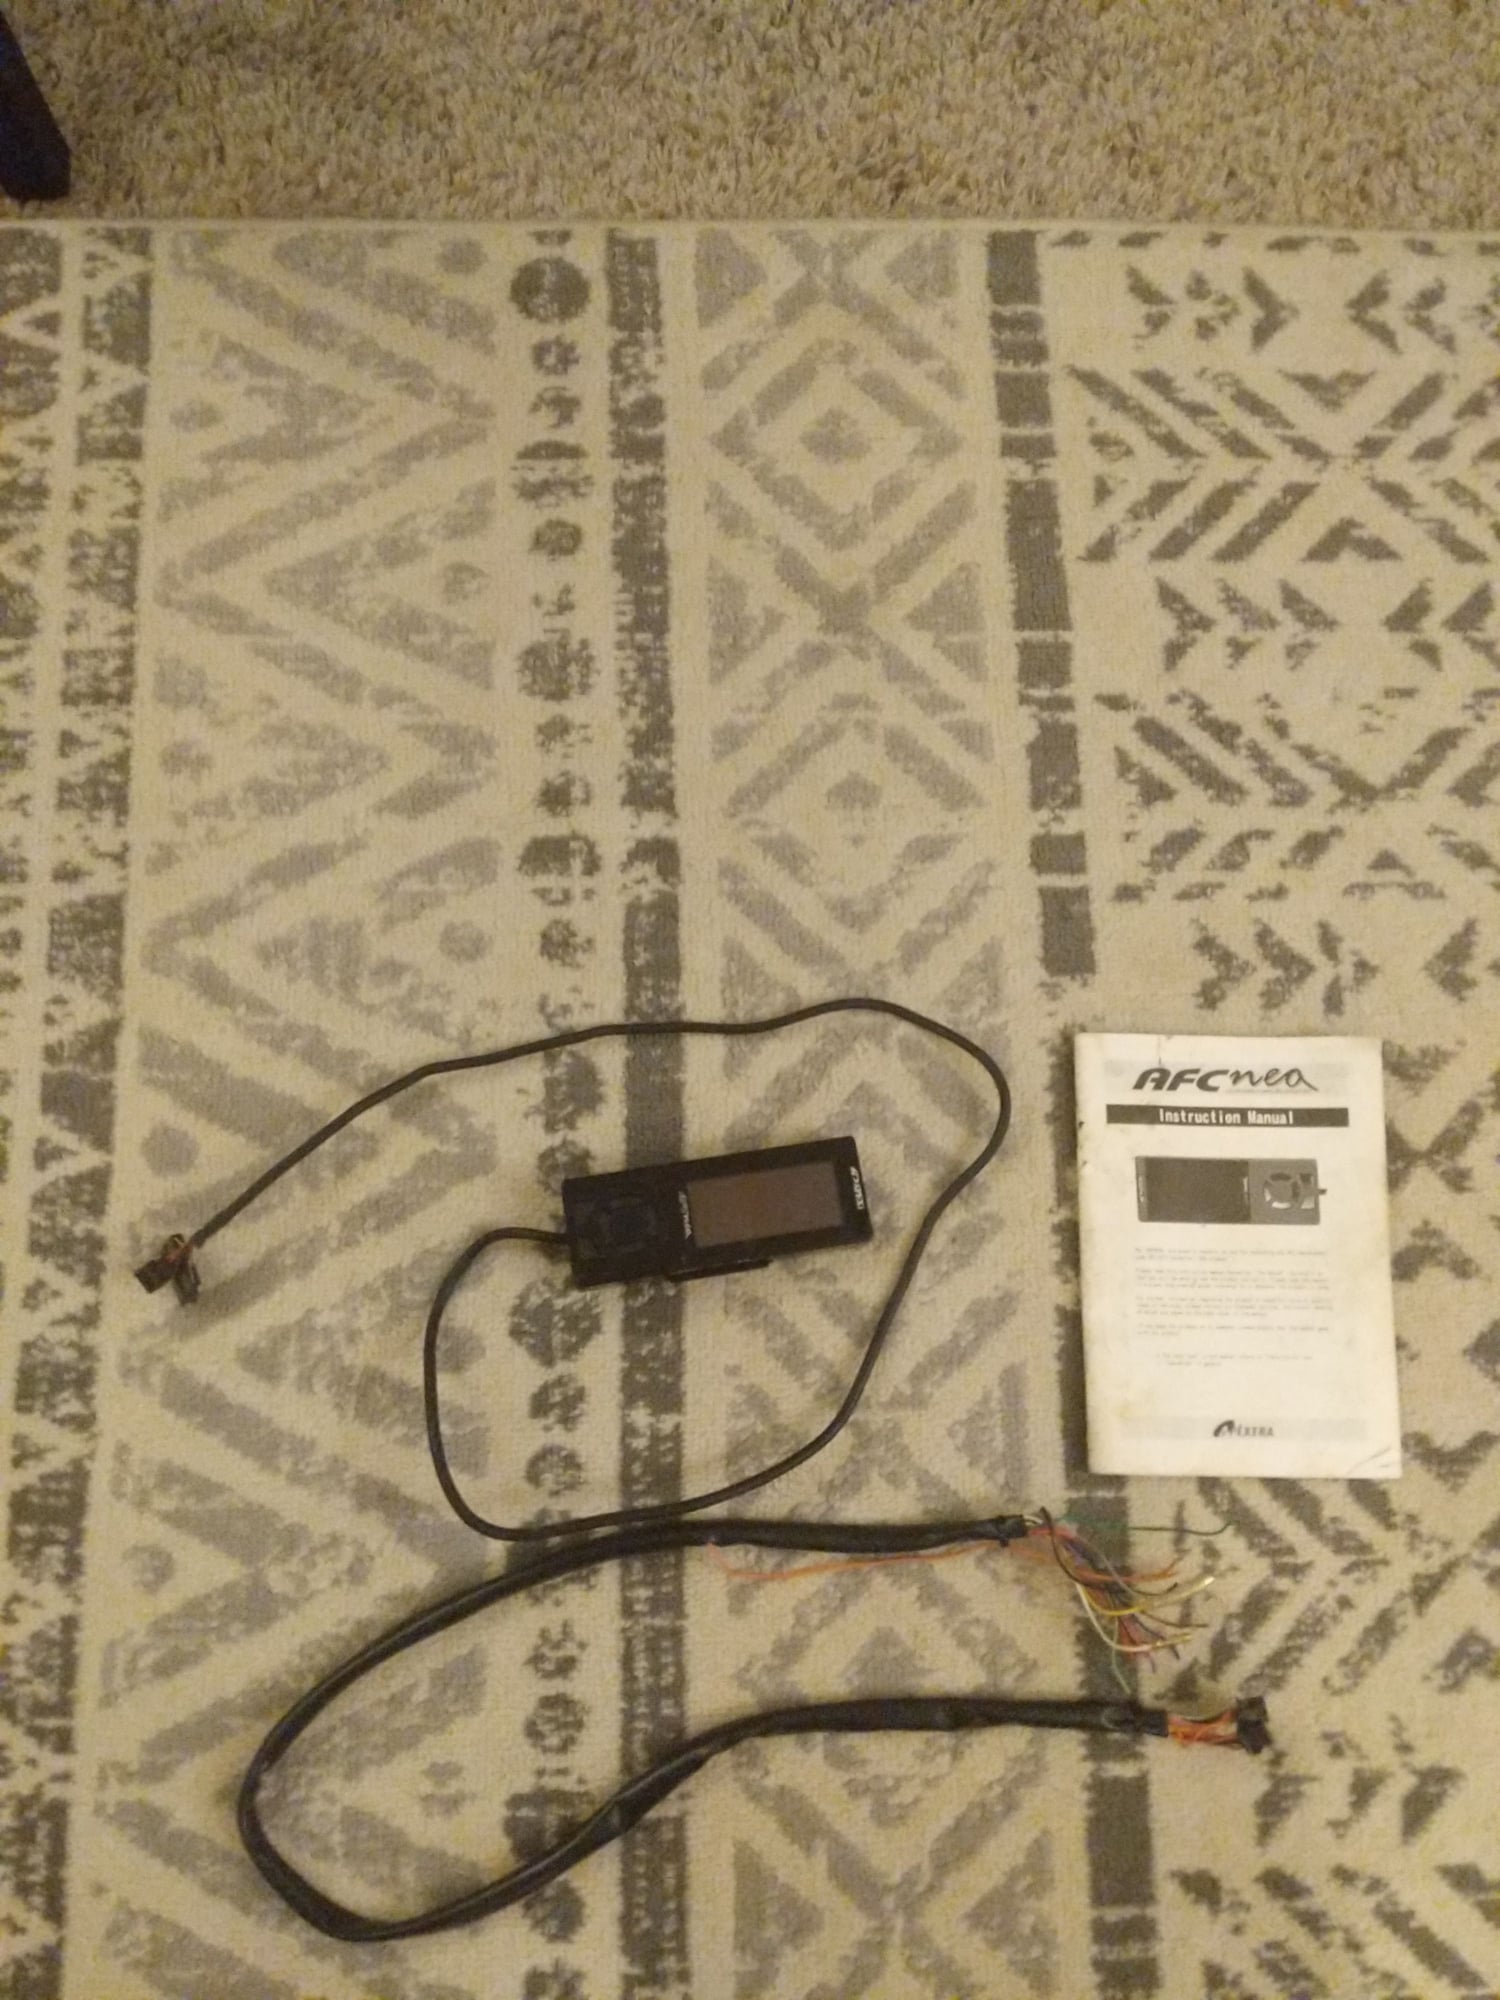 Engine - Electrical - Apexi Neo, harness, and booklet for sale - Used - All Years Any Make All Models - Junction City, KS 66441, United States